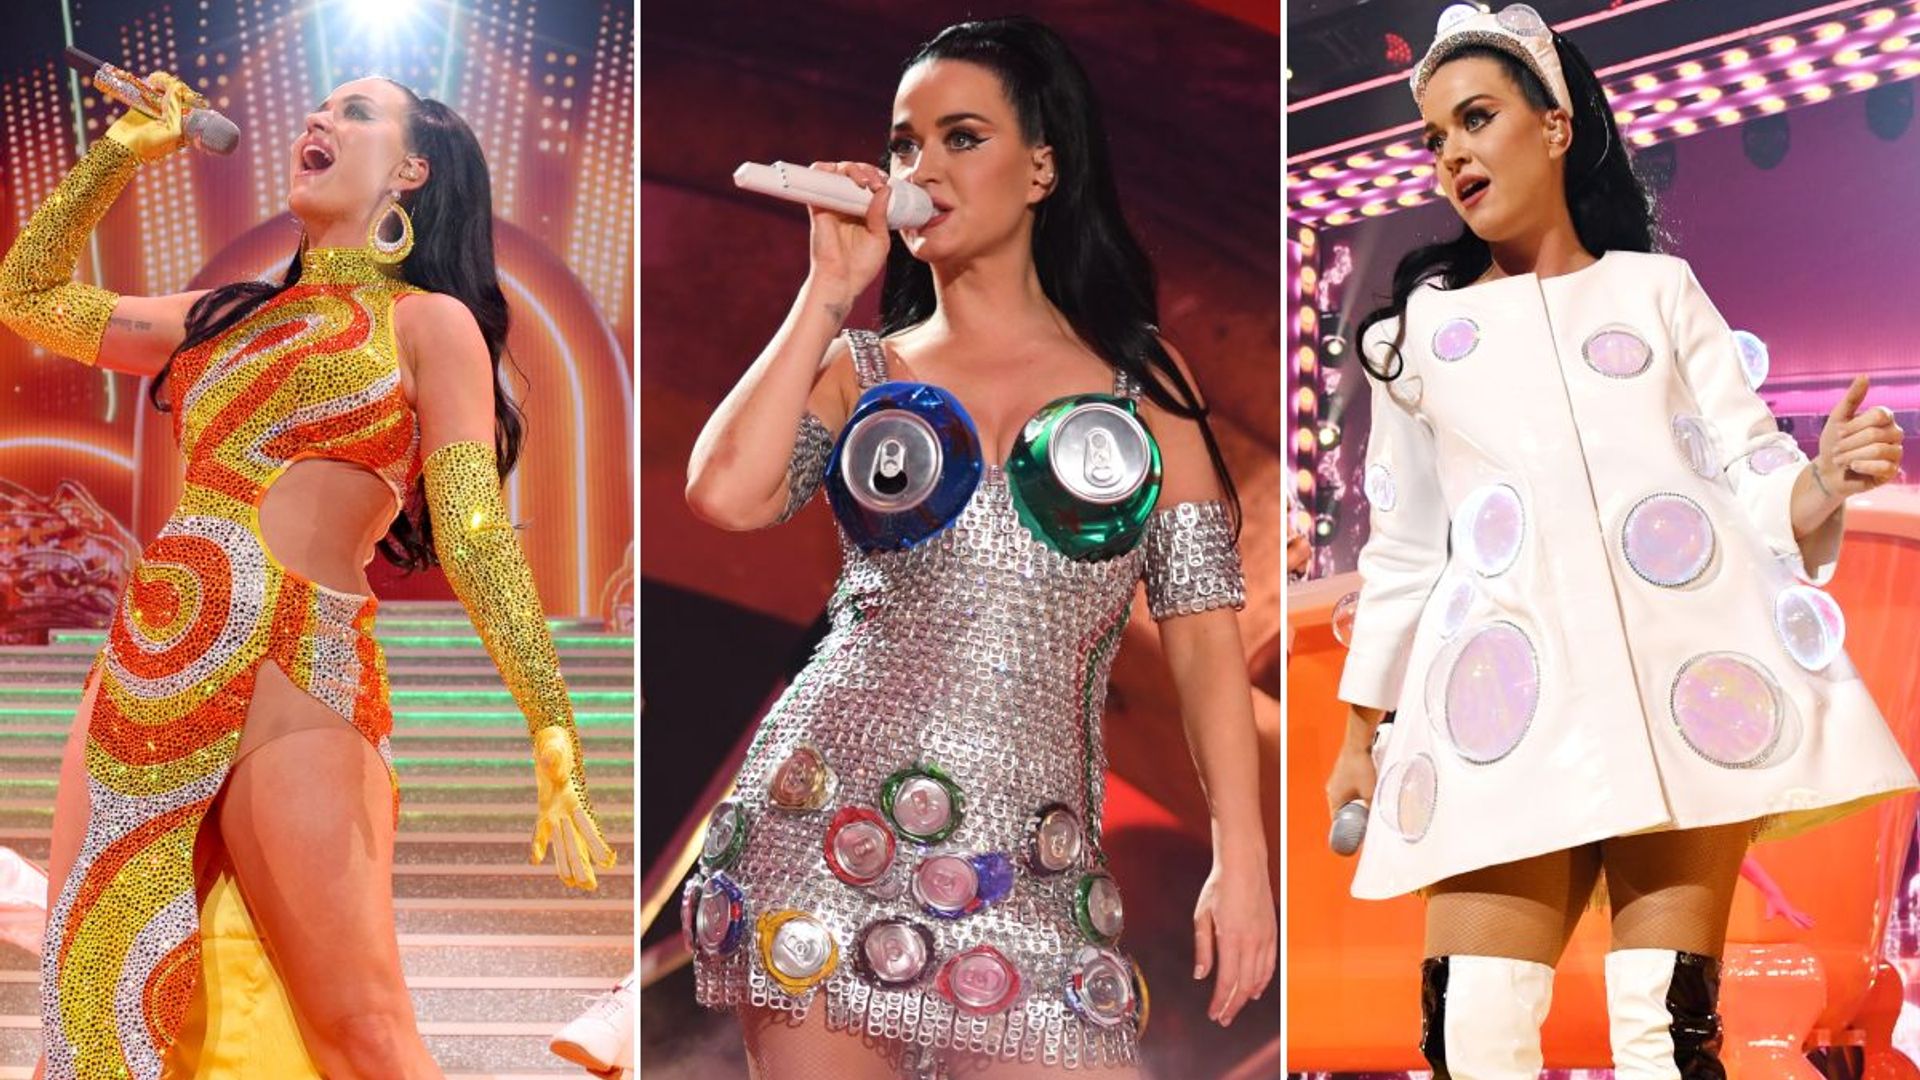 Katy Perry wows fans with shocking fashion statements for Las Vegas show -  all the looks